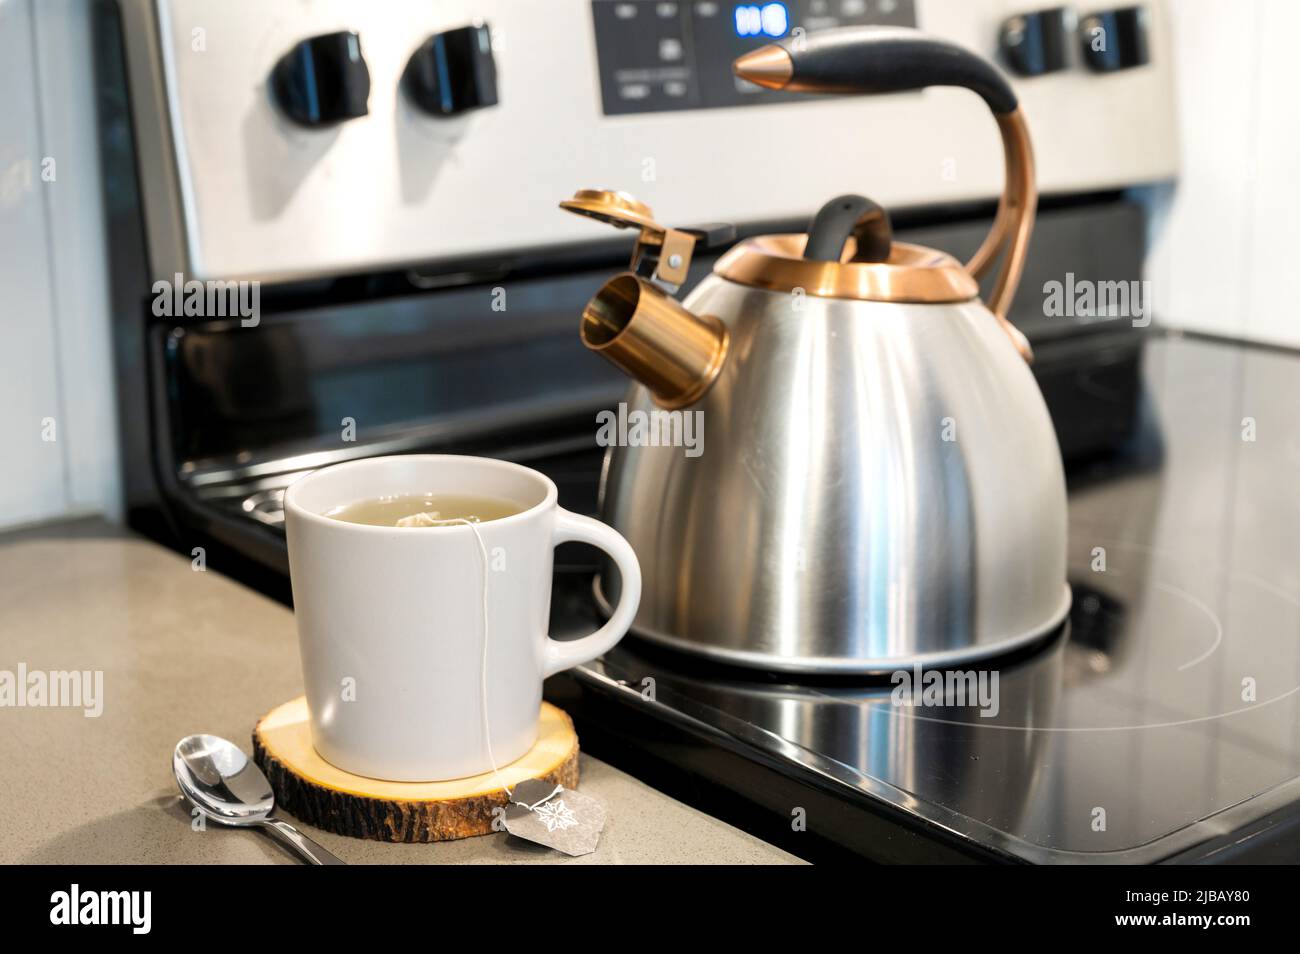 A mug of tea or coffee on a wooden cutting board with a kettle in the background. Stock Photo